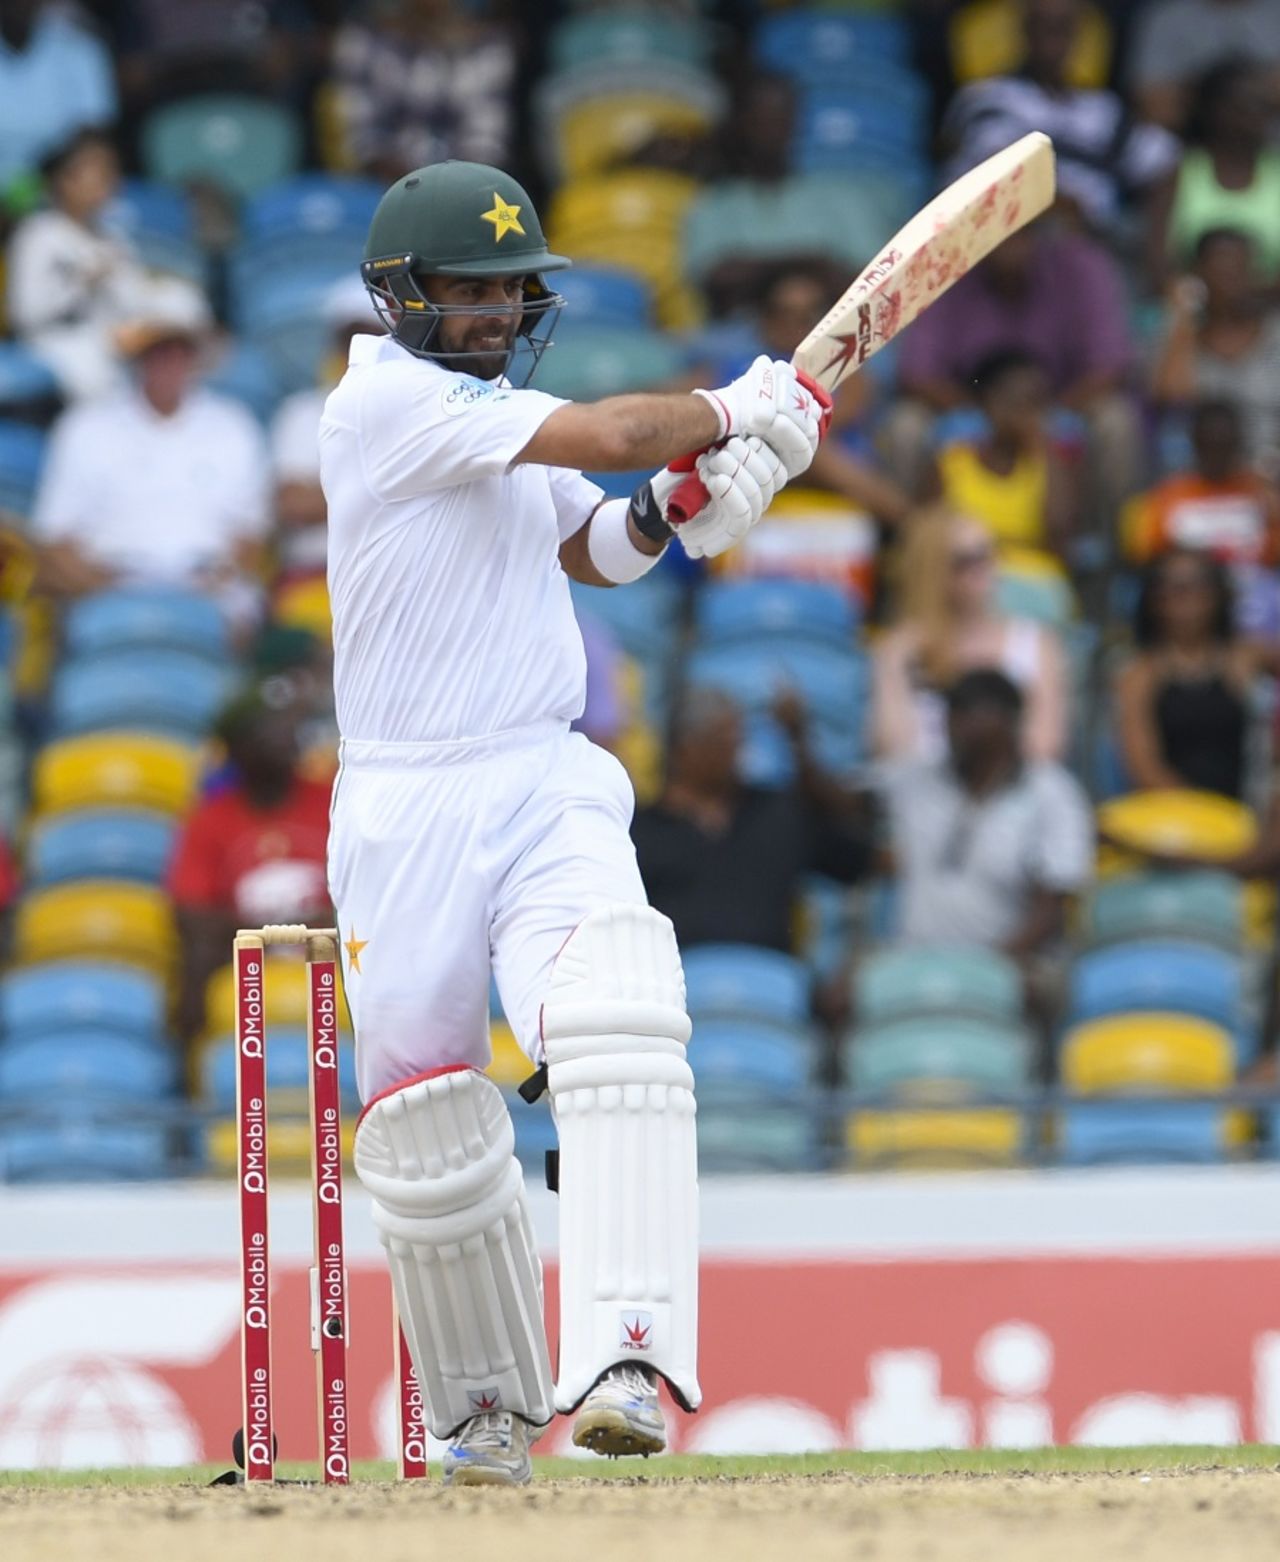 Binning the plan: Ahmed Shehzad attempts an aggressive shot during a defensive innings, West Indies v Pakistan, 2nd Test, Bridgetown,2nd day, May 1, 2017